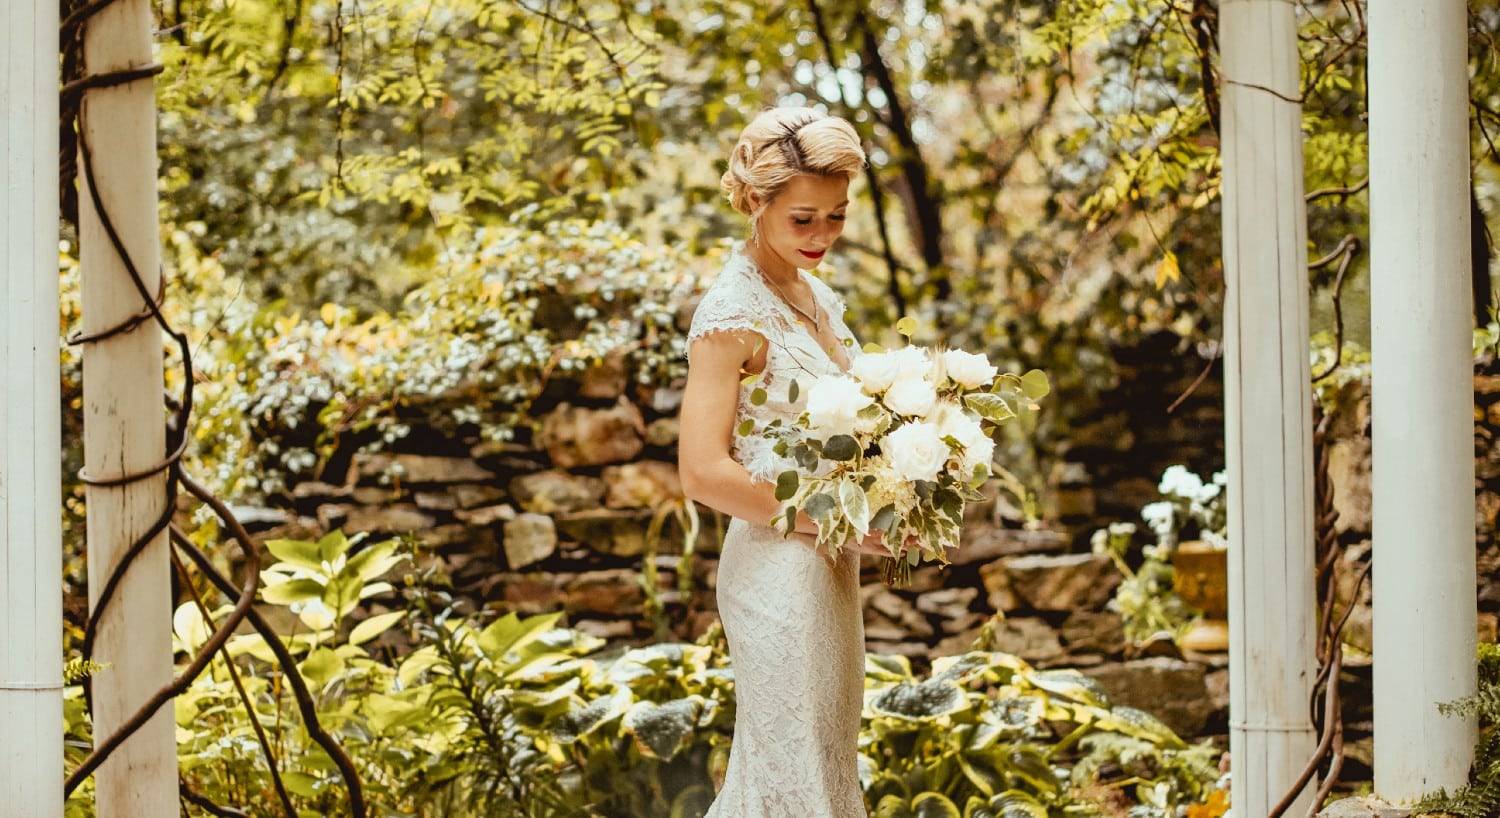 Stunning bride in a wedding gown with bouquet standing under a white pergola surrounded by trees